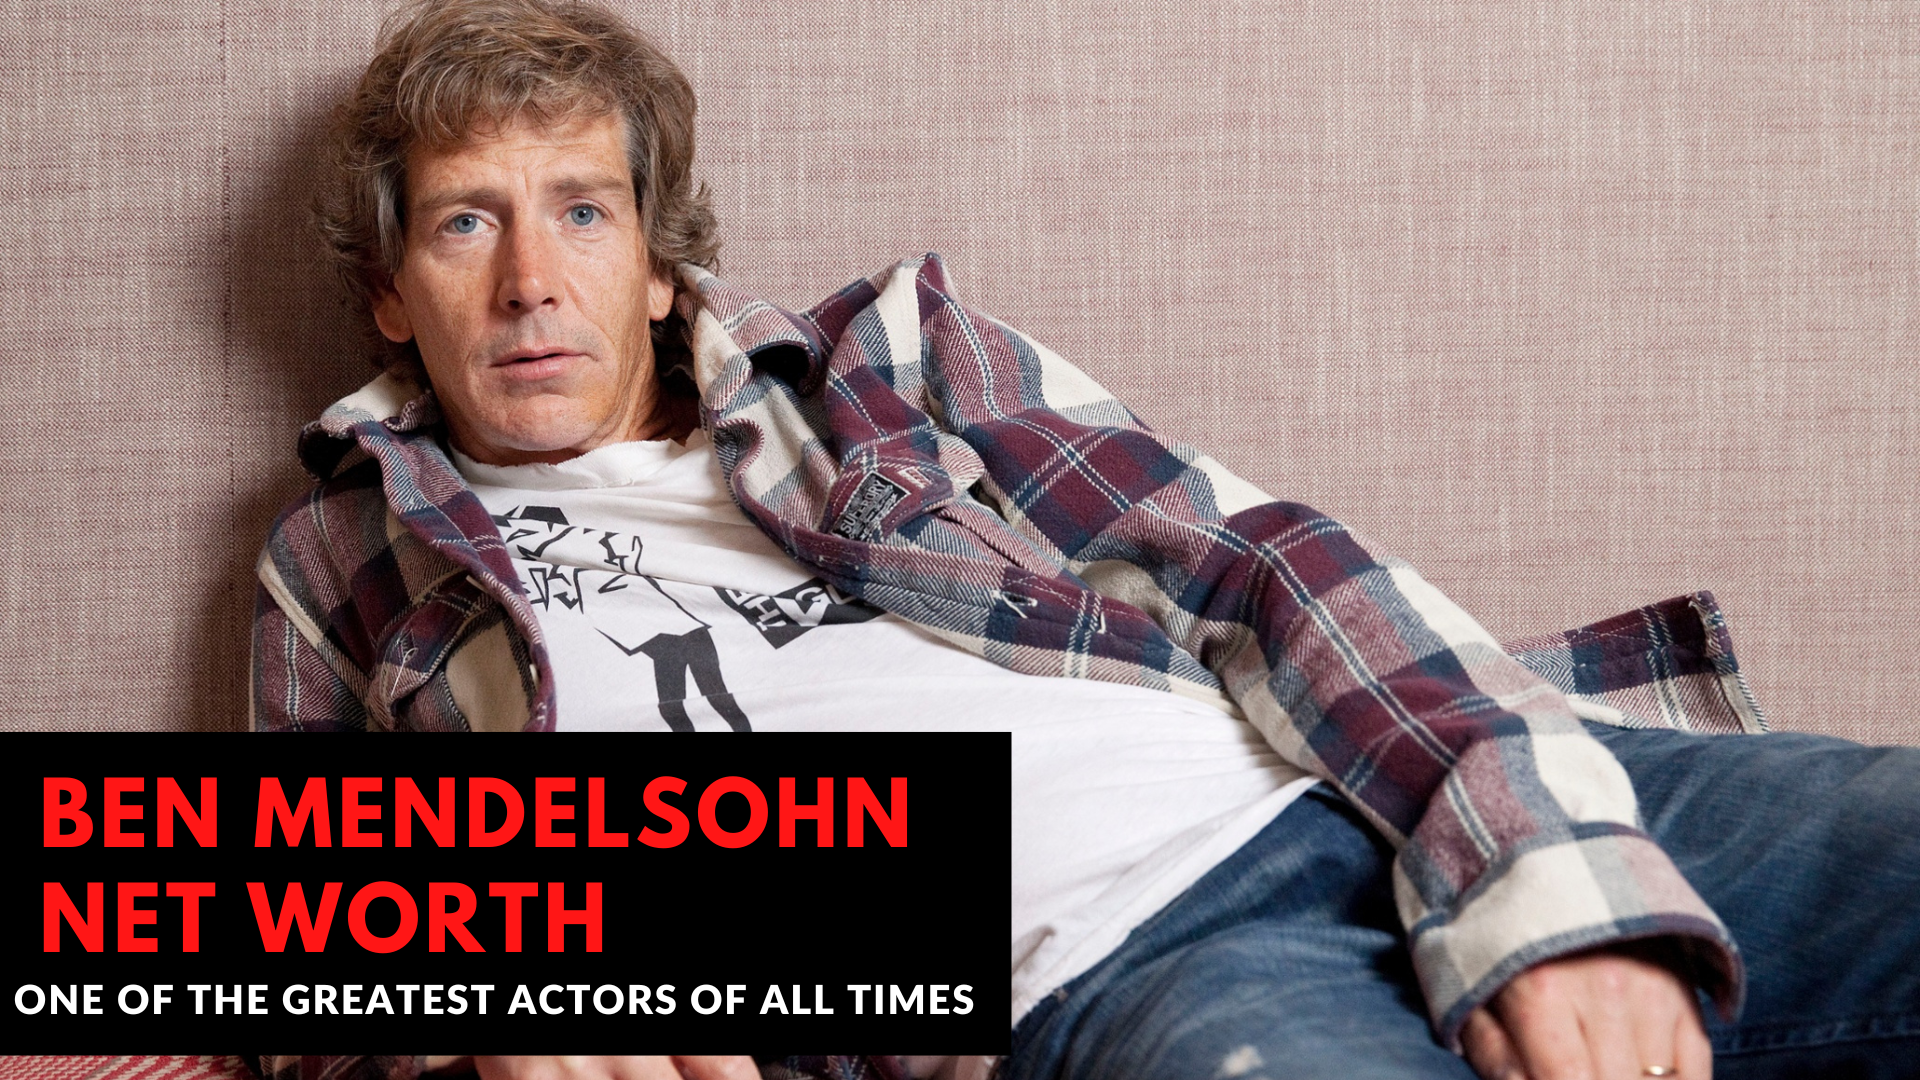 Ben Mendelsohn Net Worth - One Of The Greatest Actors Of All Times